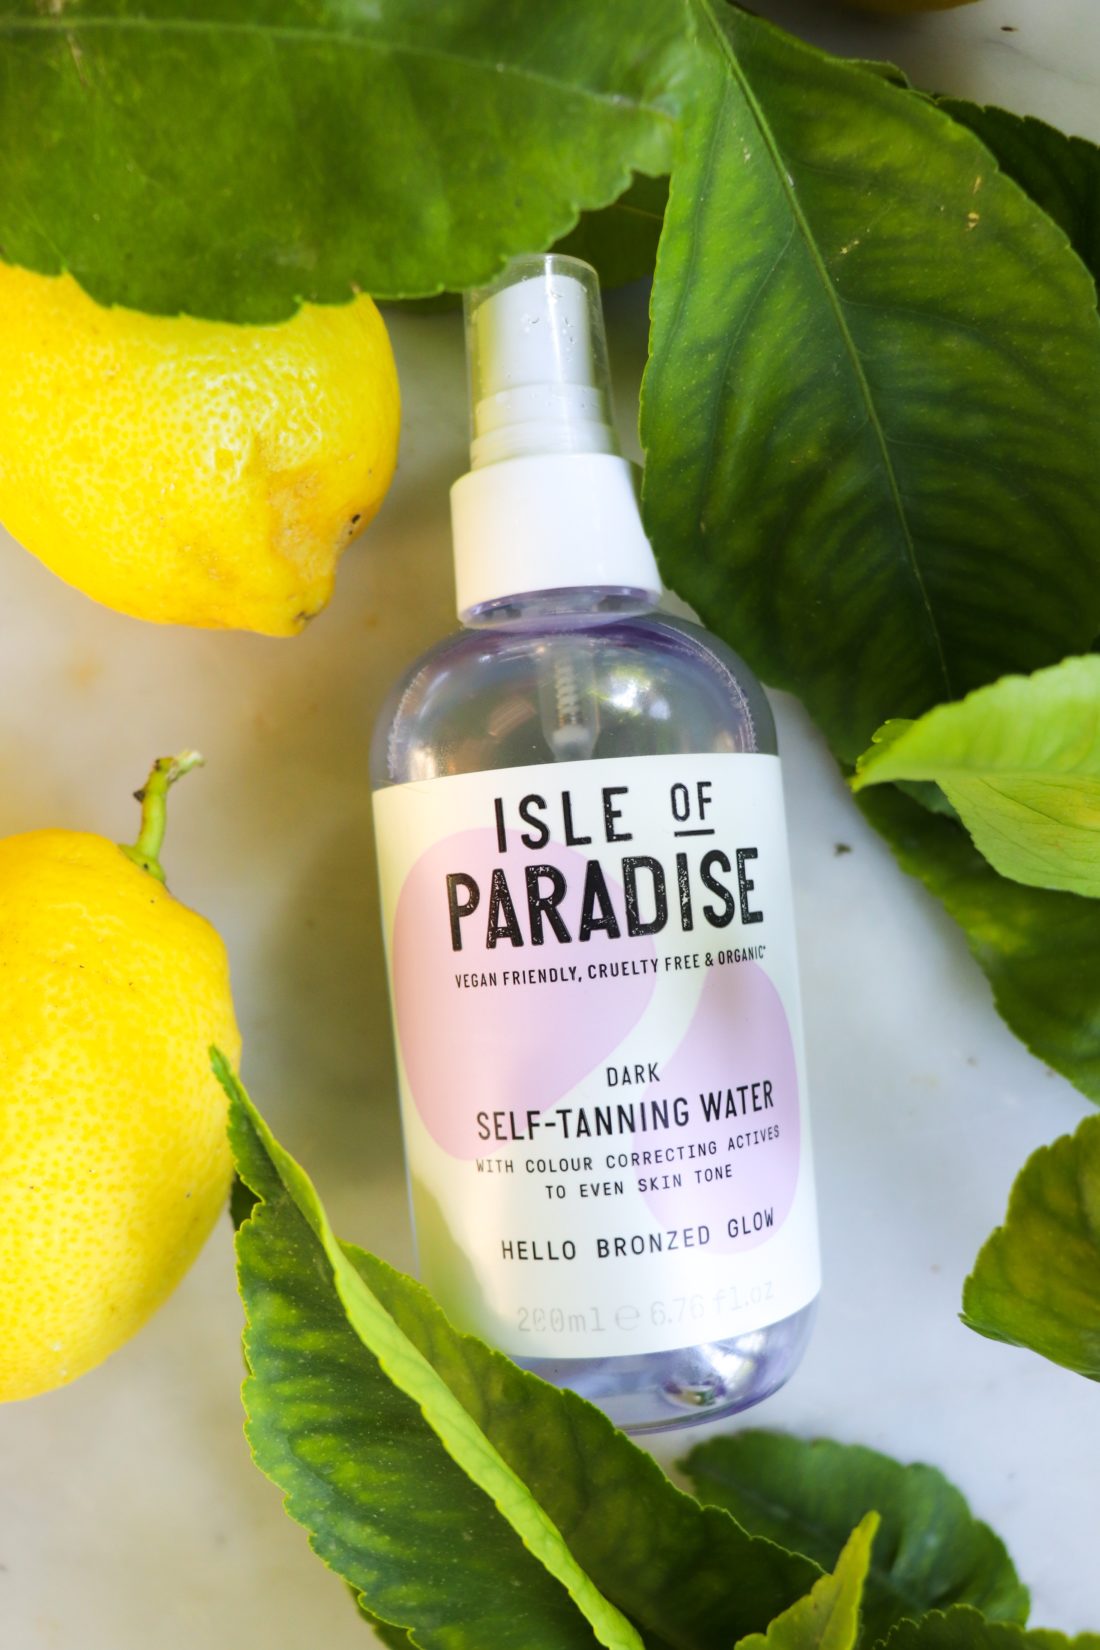 Eva Amurri Martino shares her July obsessions, including Isle Of Paradise Dark Self Tanning Water